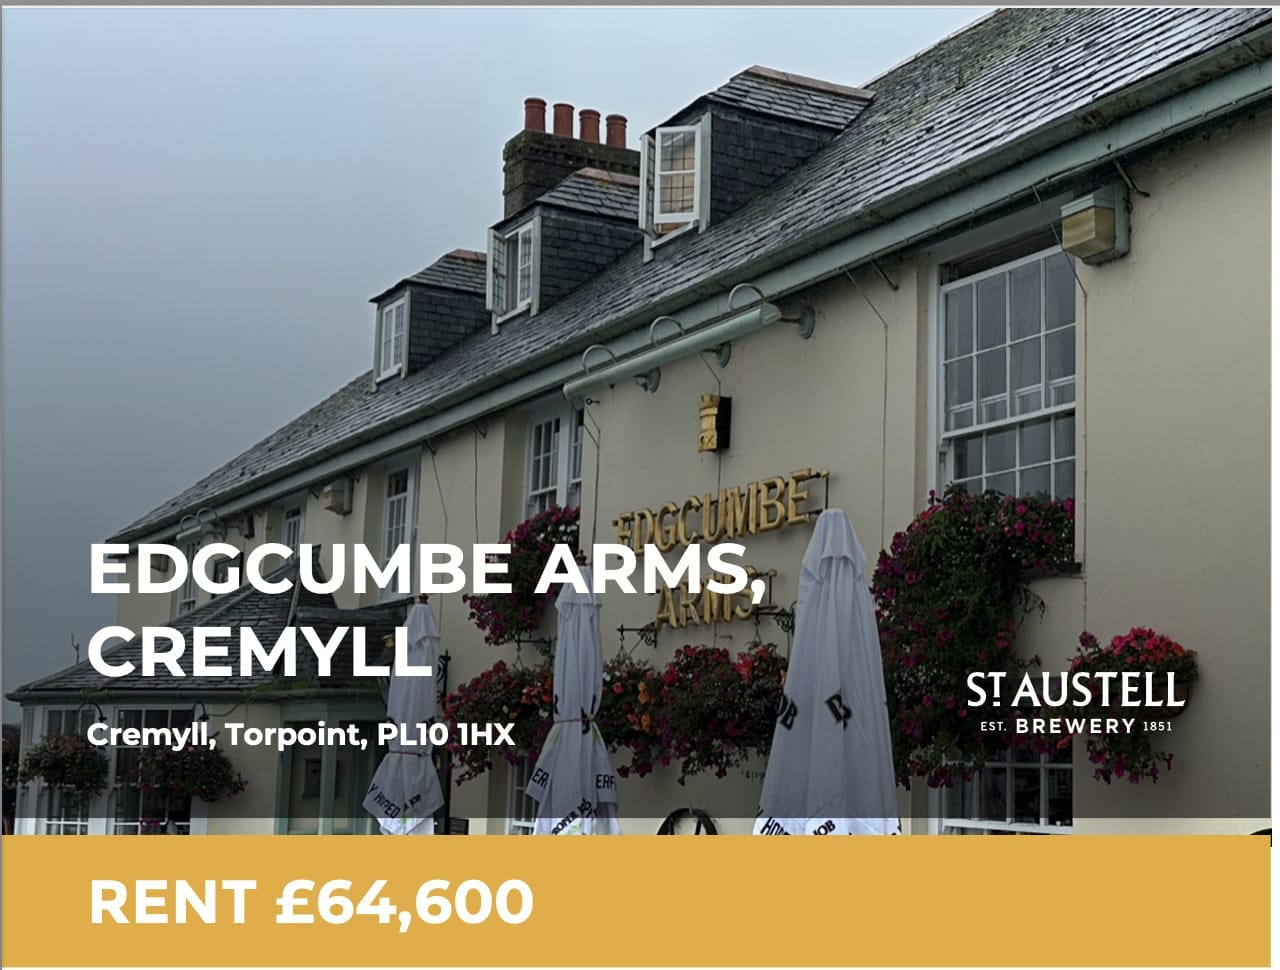 Managed Partnership Pubs In Cremyll – Run The Edgcumbe !